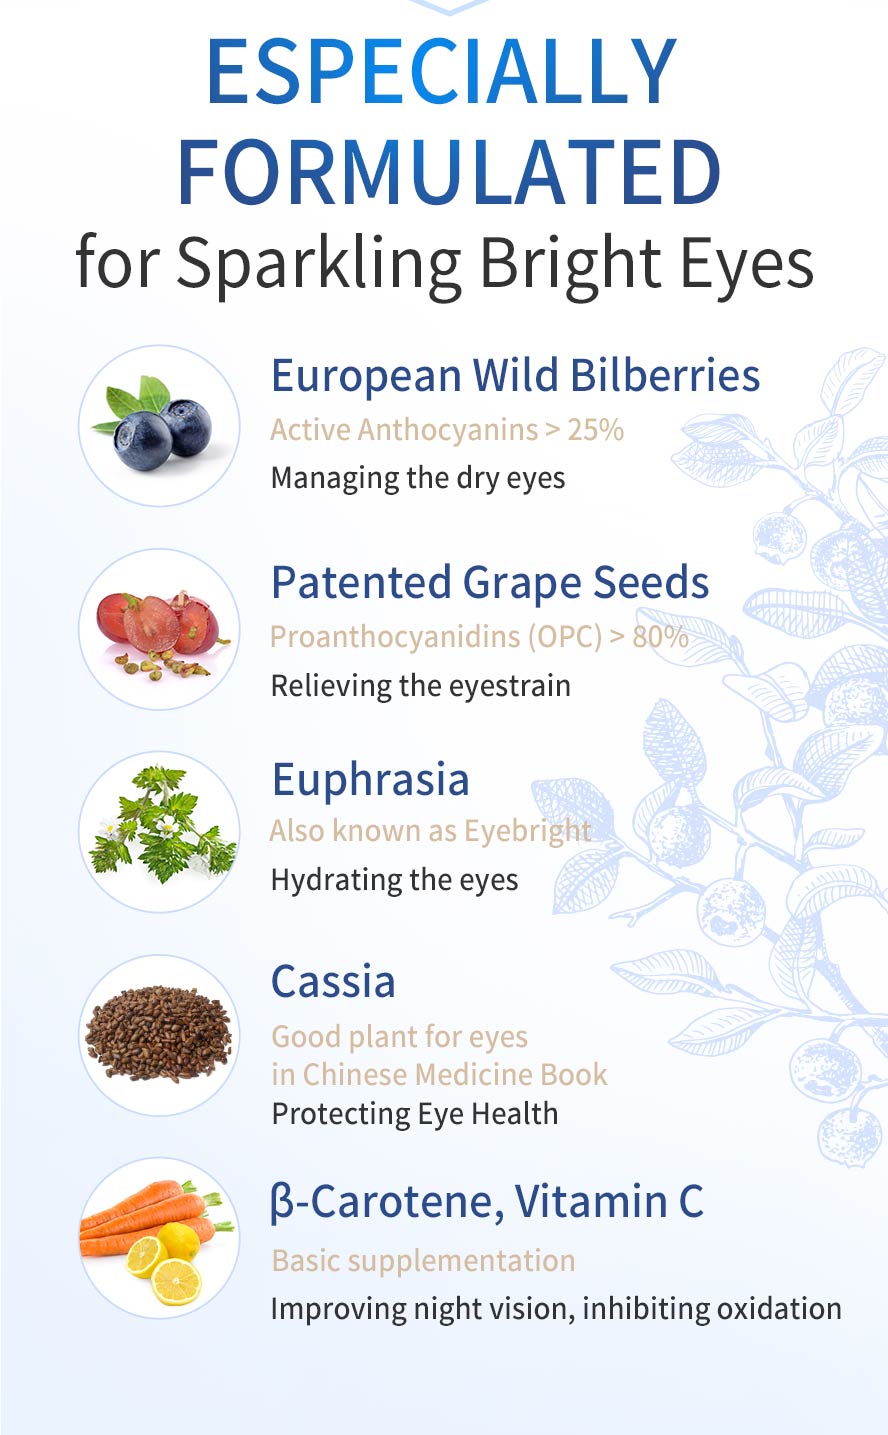 BHK Bilberry Eyebright Veg Capsules contains more than 25% of Anthocyanins, more than more than 80% of Proanthocyanidins. Patented Grape Seed Extract, Cassia, Eyebright, β-Carotene, Vitamin C can reduce dryness and eyestrain, improve night vision and maintain the sparkling bright eyes